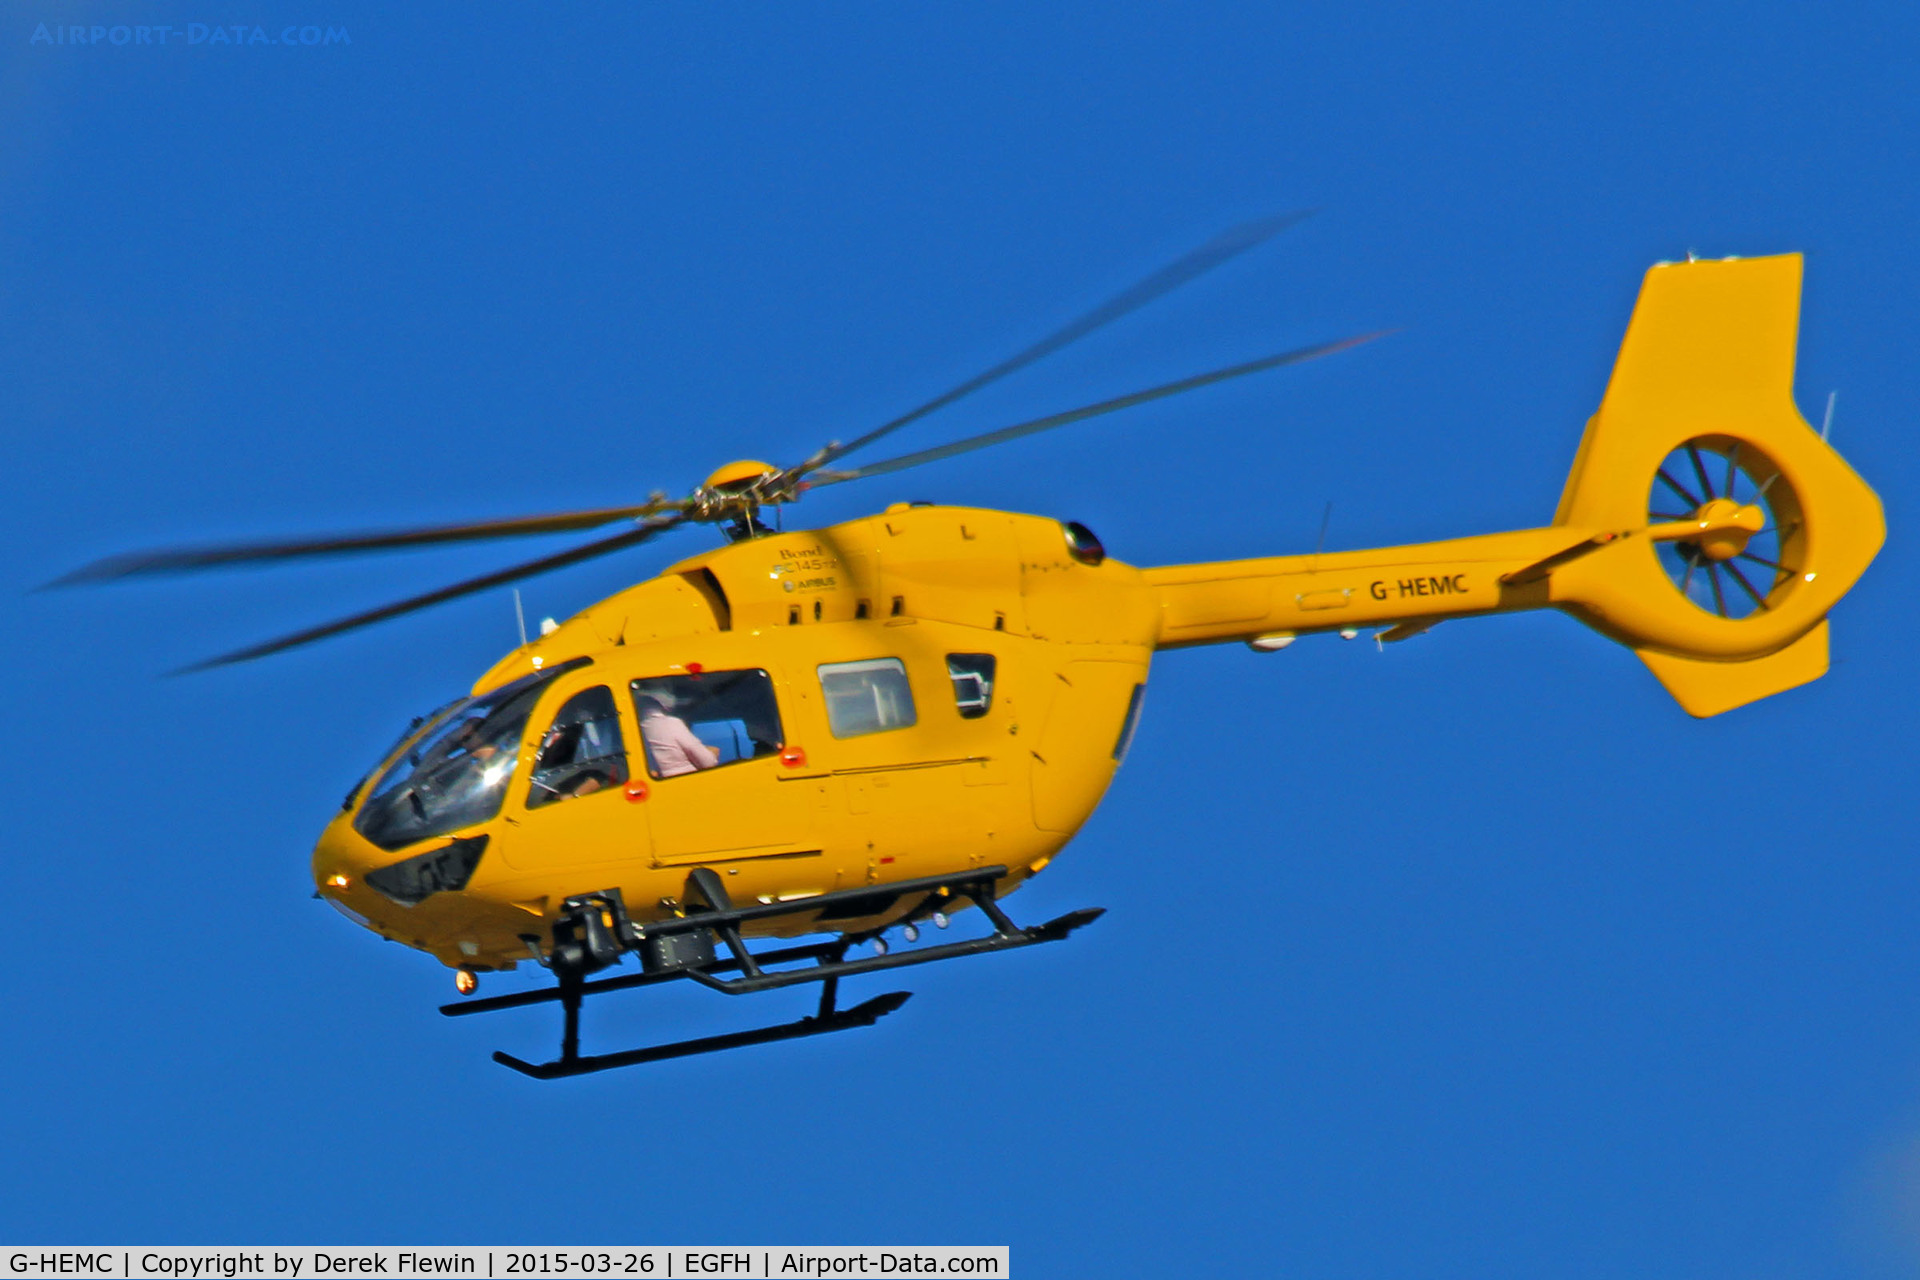 G-HEMC, 2014 Airbus Helicopters EC-145T-2 (BK-117D-2) C/N 20012, Visiting EC-145, East Anglian Air Ambulance, call sign redhead 79, previously D-HADM, seen shortly after lifting from the Wales Air Ambulance base.